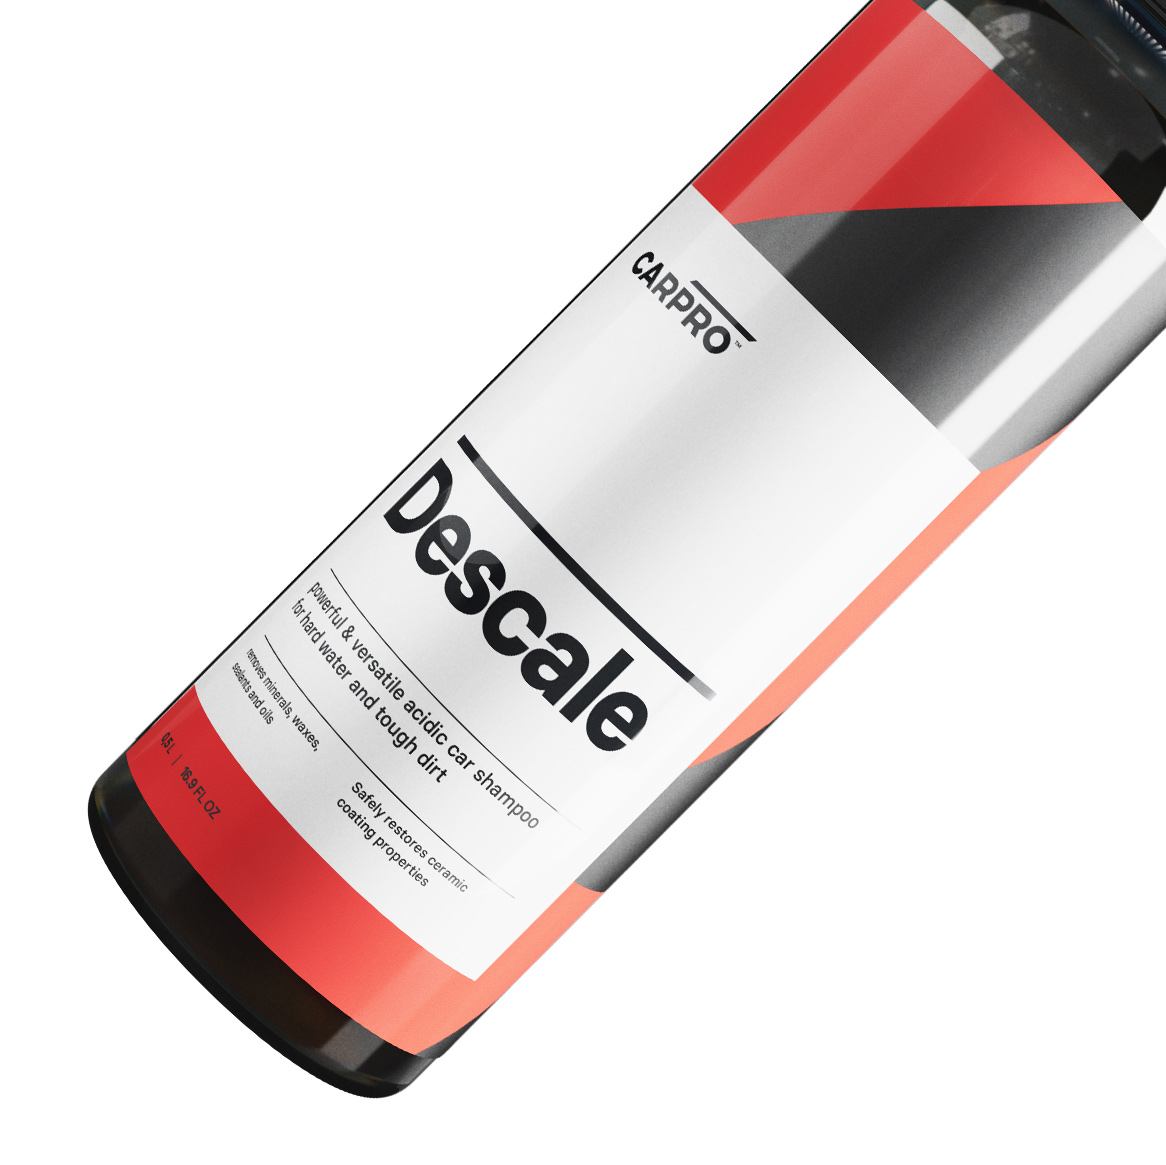 Carpro Descale now available at box of craving serusop A9, B117 & B118